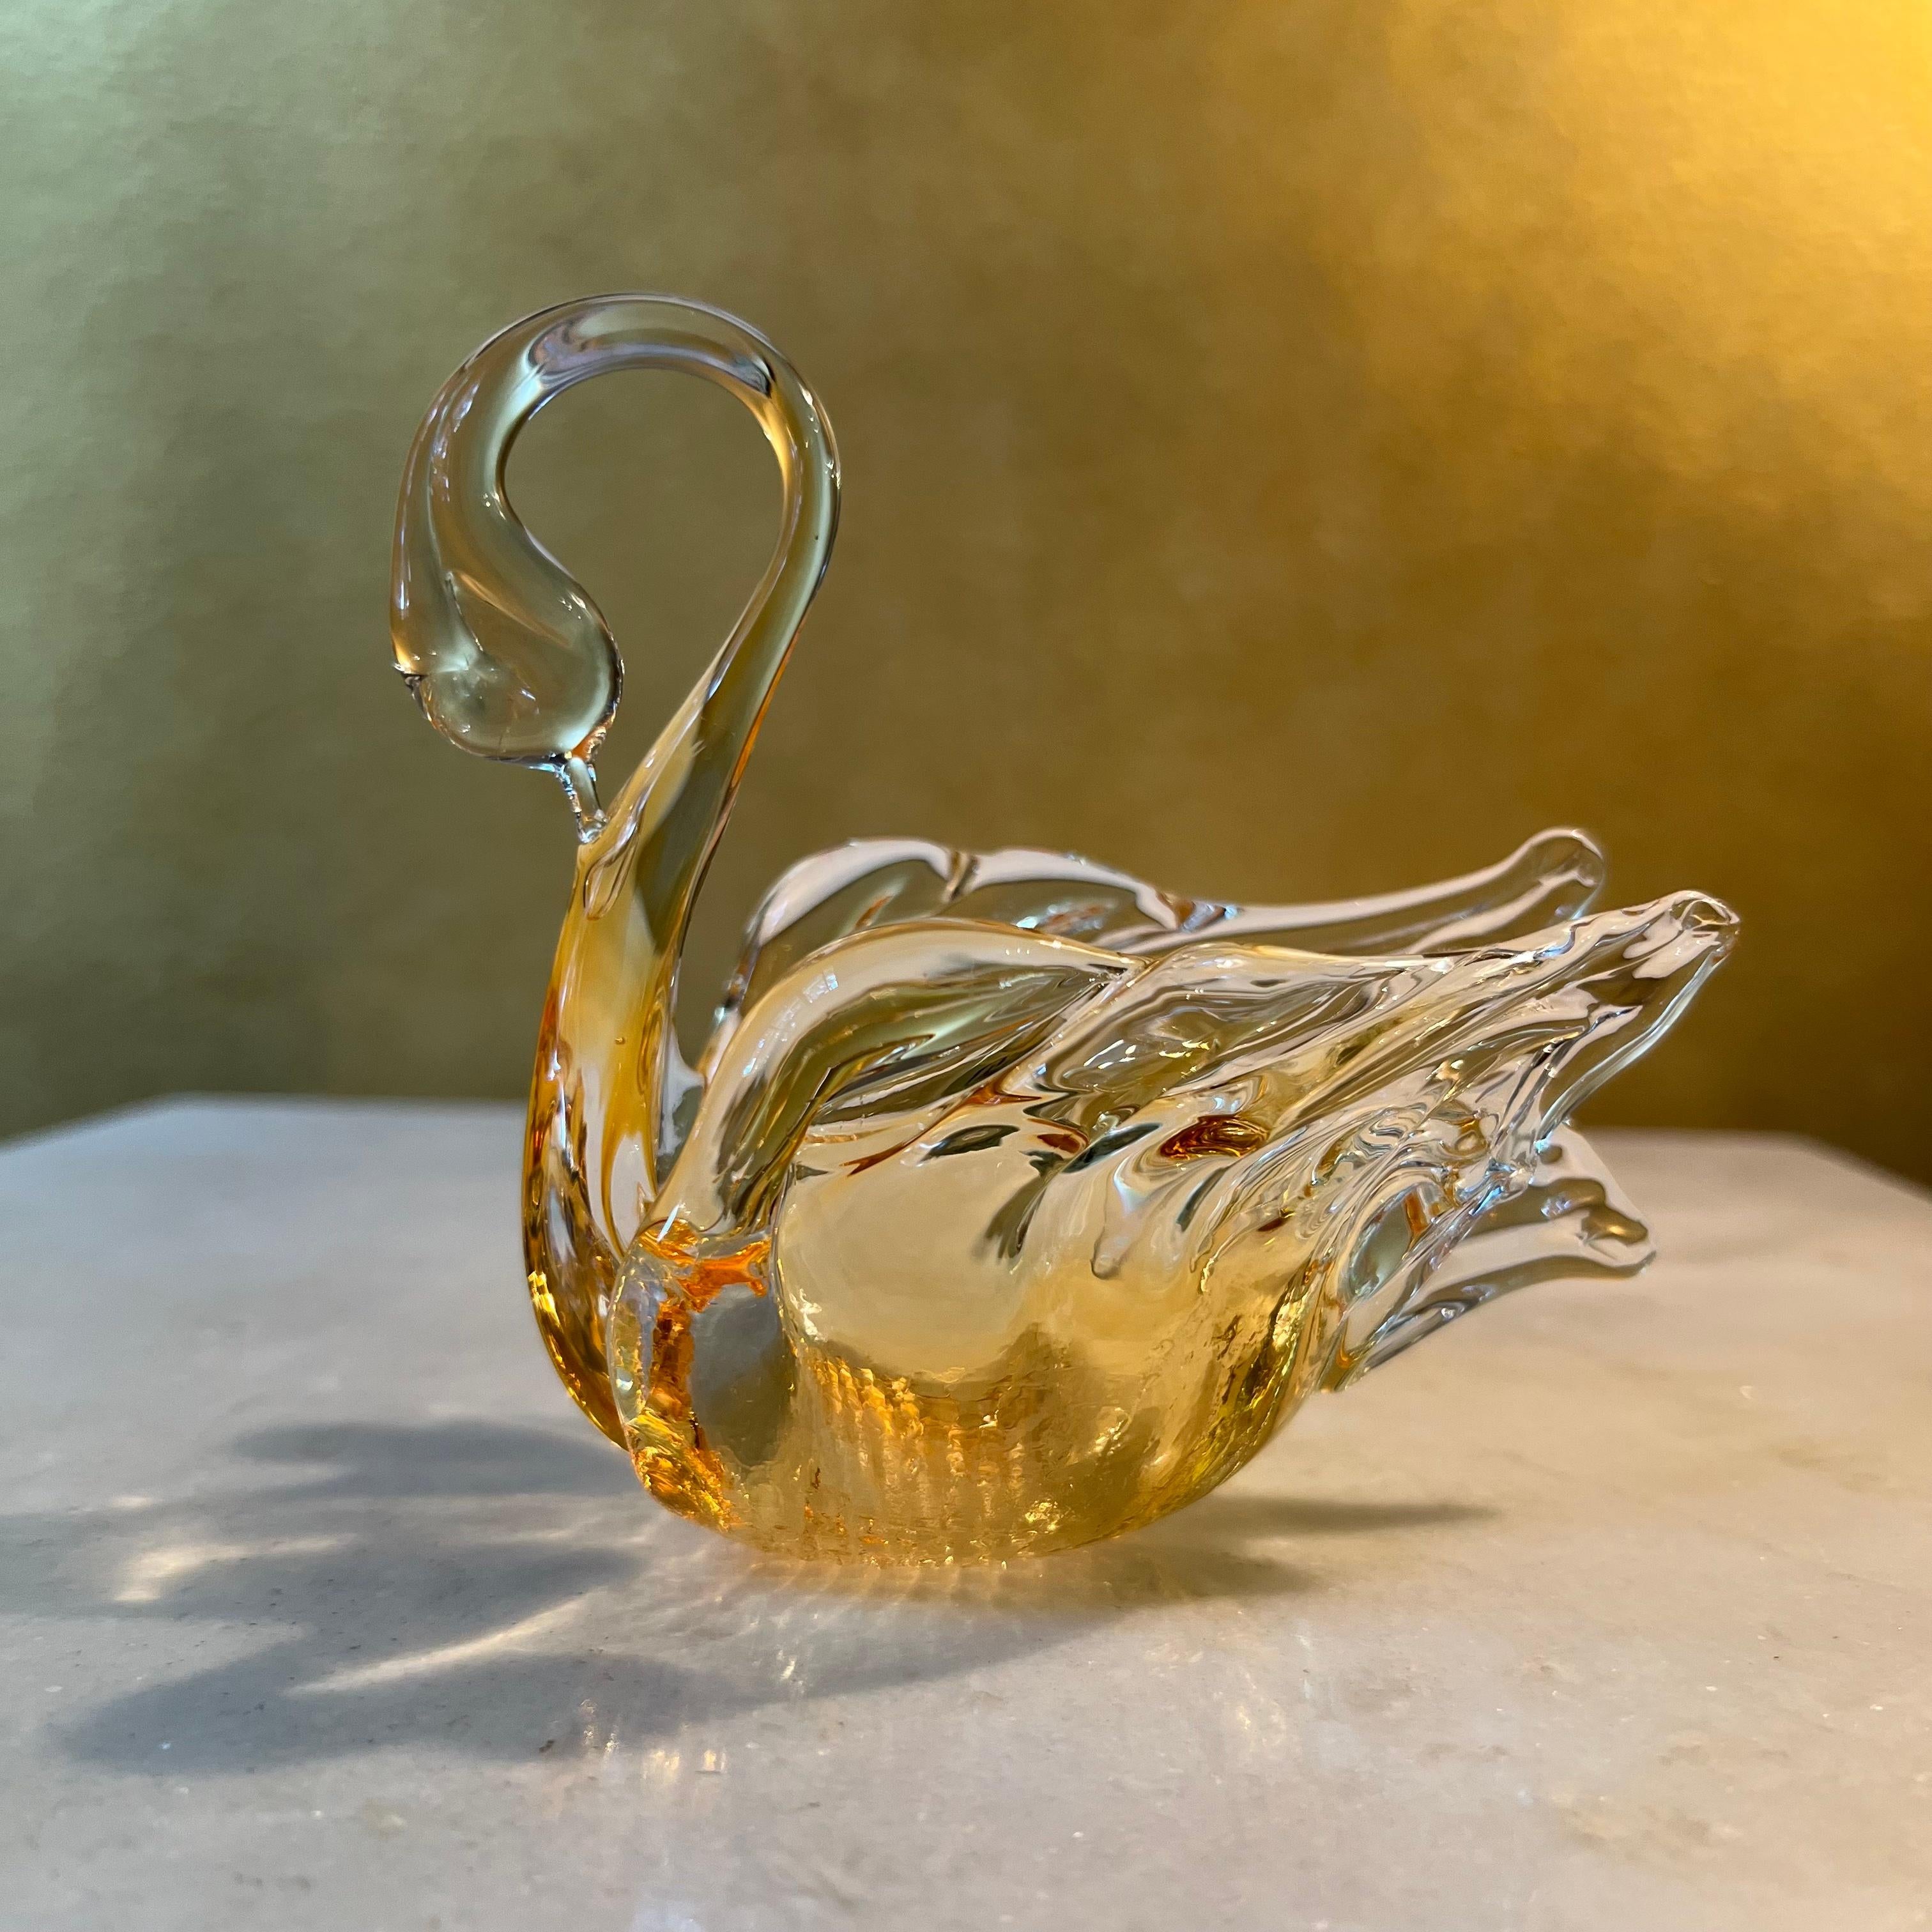 Golden and clear glass can be used as a ornament or bowl, sticker Chalet in Canada 

Material: Glass

Country Of Origin: Canada

Measurements: 12cm high, 12cm length, 7cm width

Postage via Australia Post with tracking available